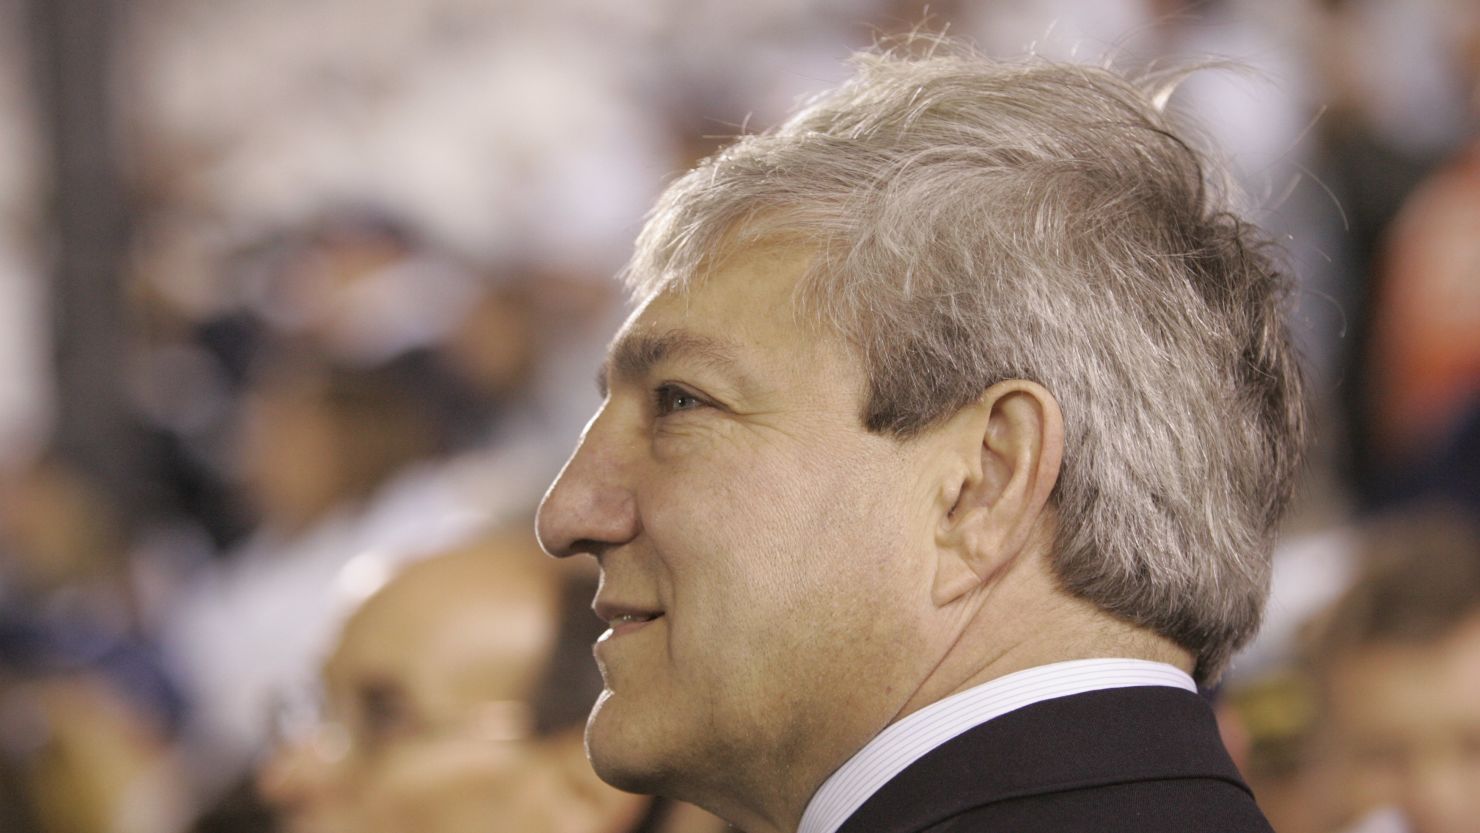 Former Penn State President Graham Spanier faces charges for the first time in the wake of the Jerry Sandusky scandal.